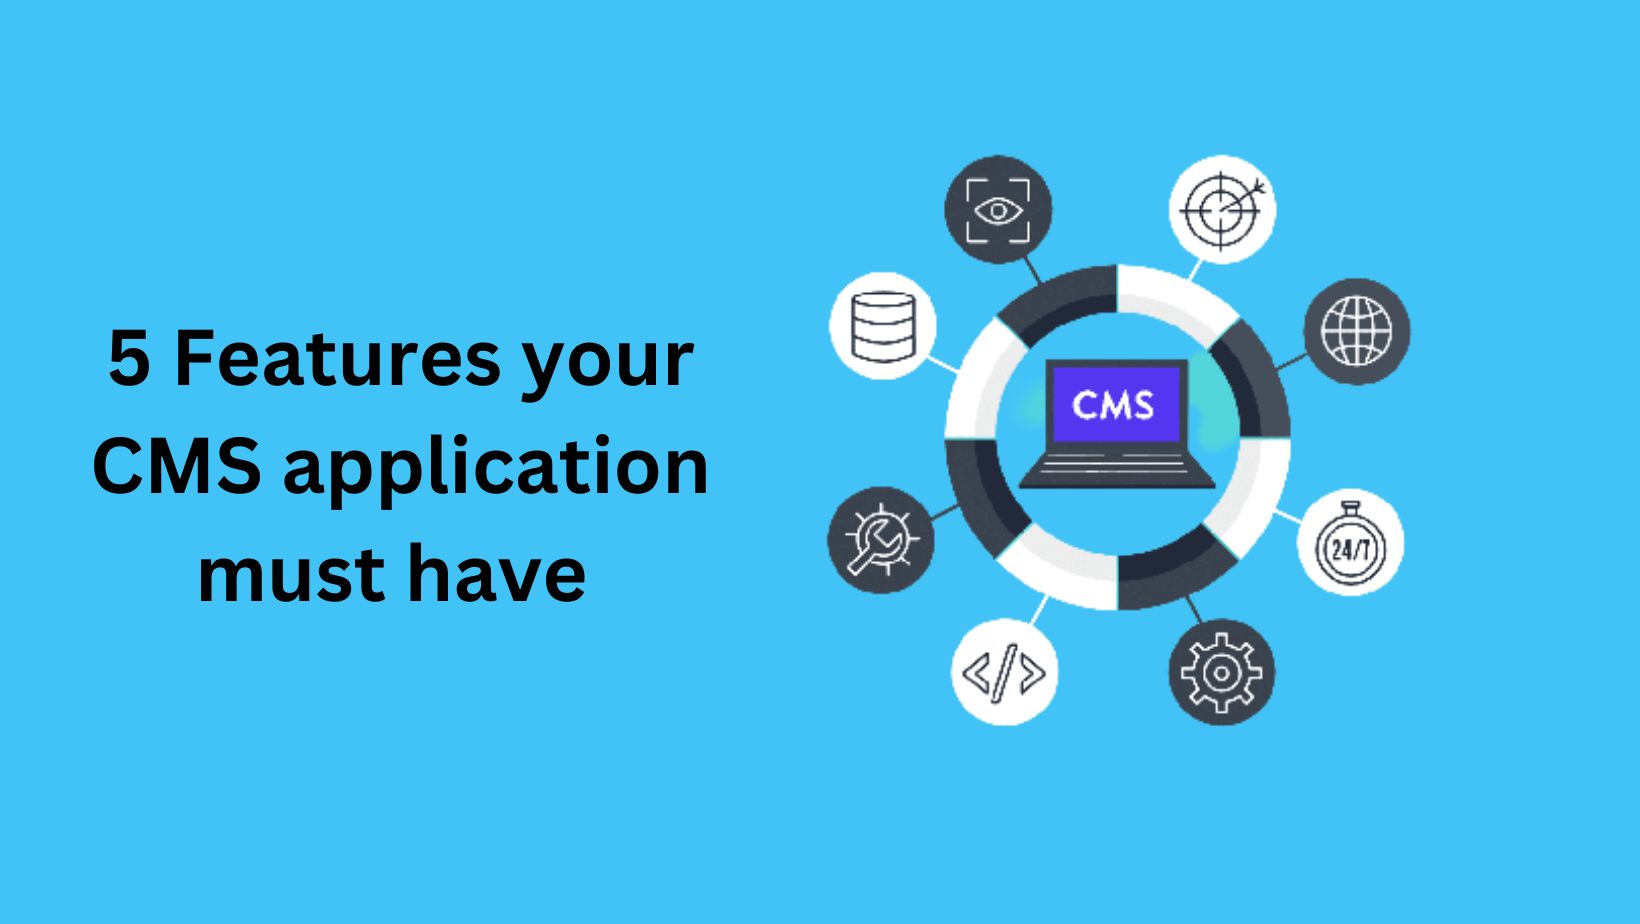 5 Features Your CMS Application Must Have